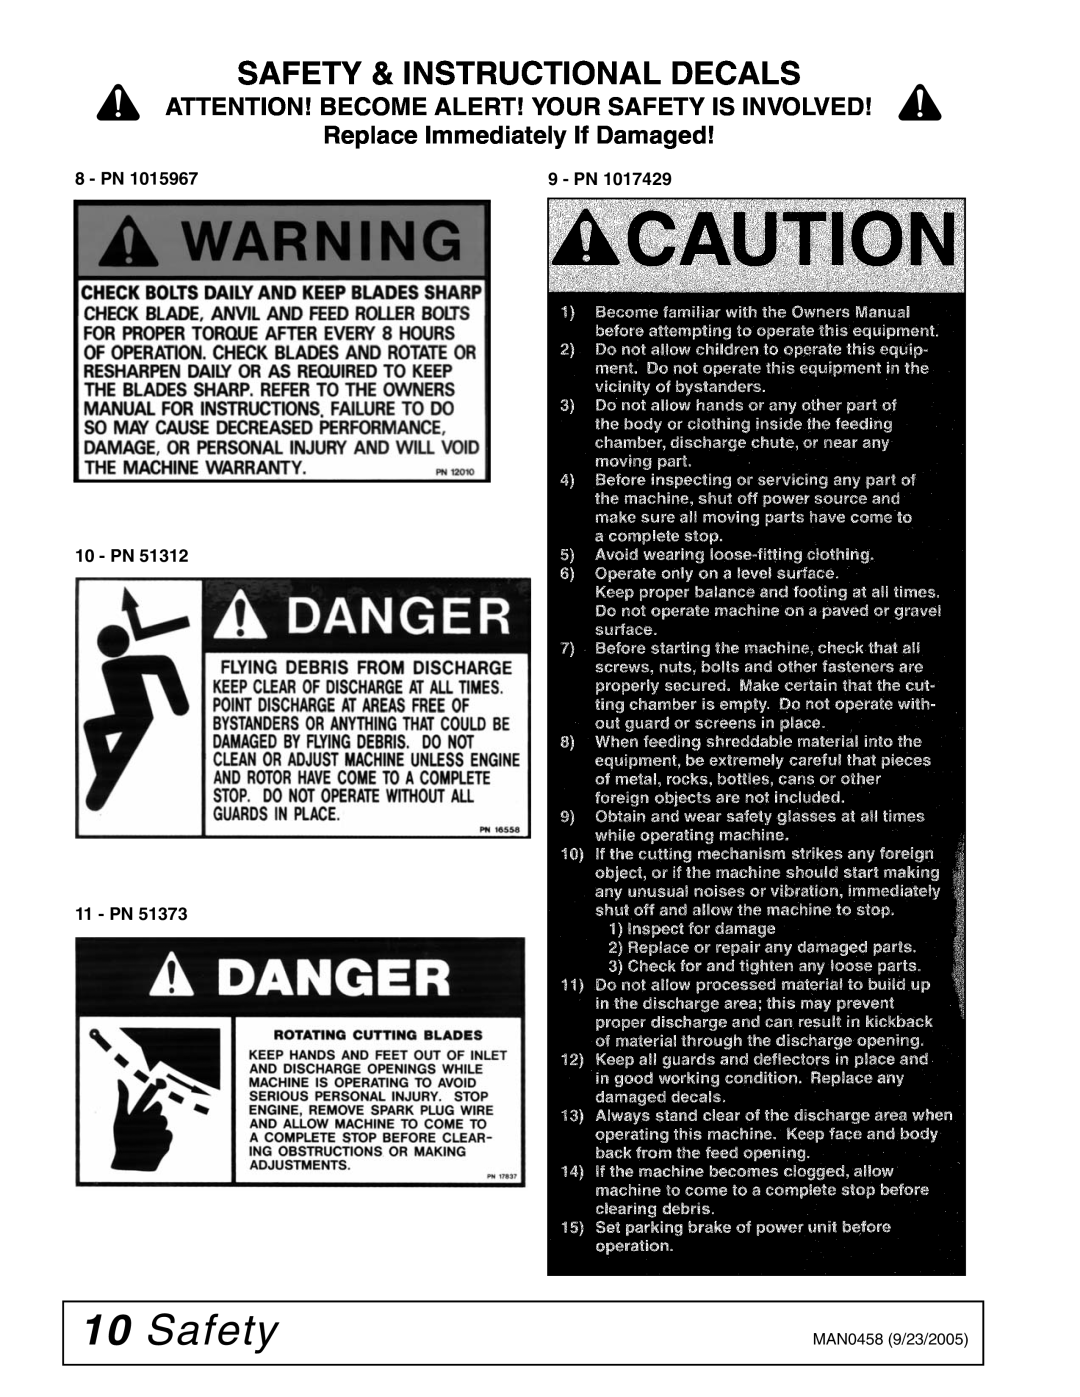 Woods Equipment TCH4500 manual Safety & Instructional Decals, Attention! Become Alert! Your Safety Is Involved, Pn 